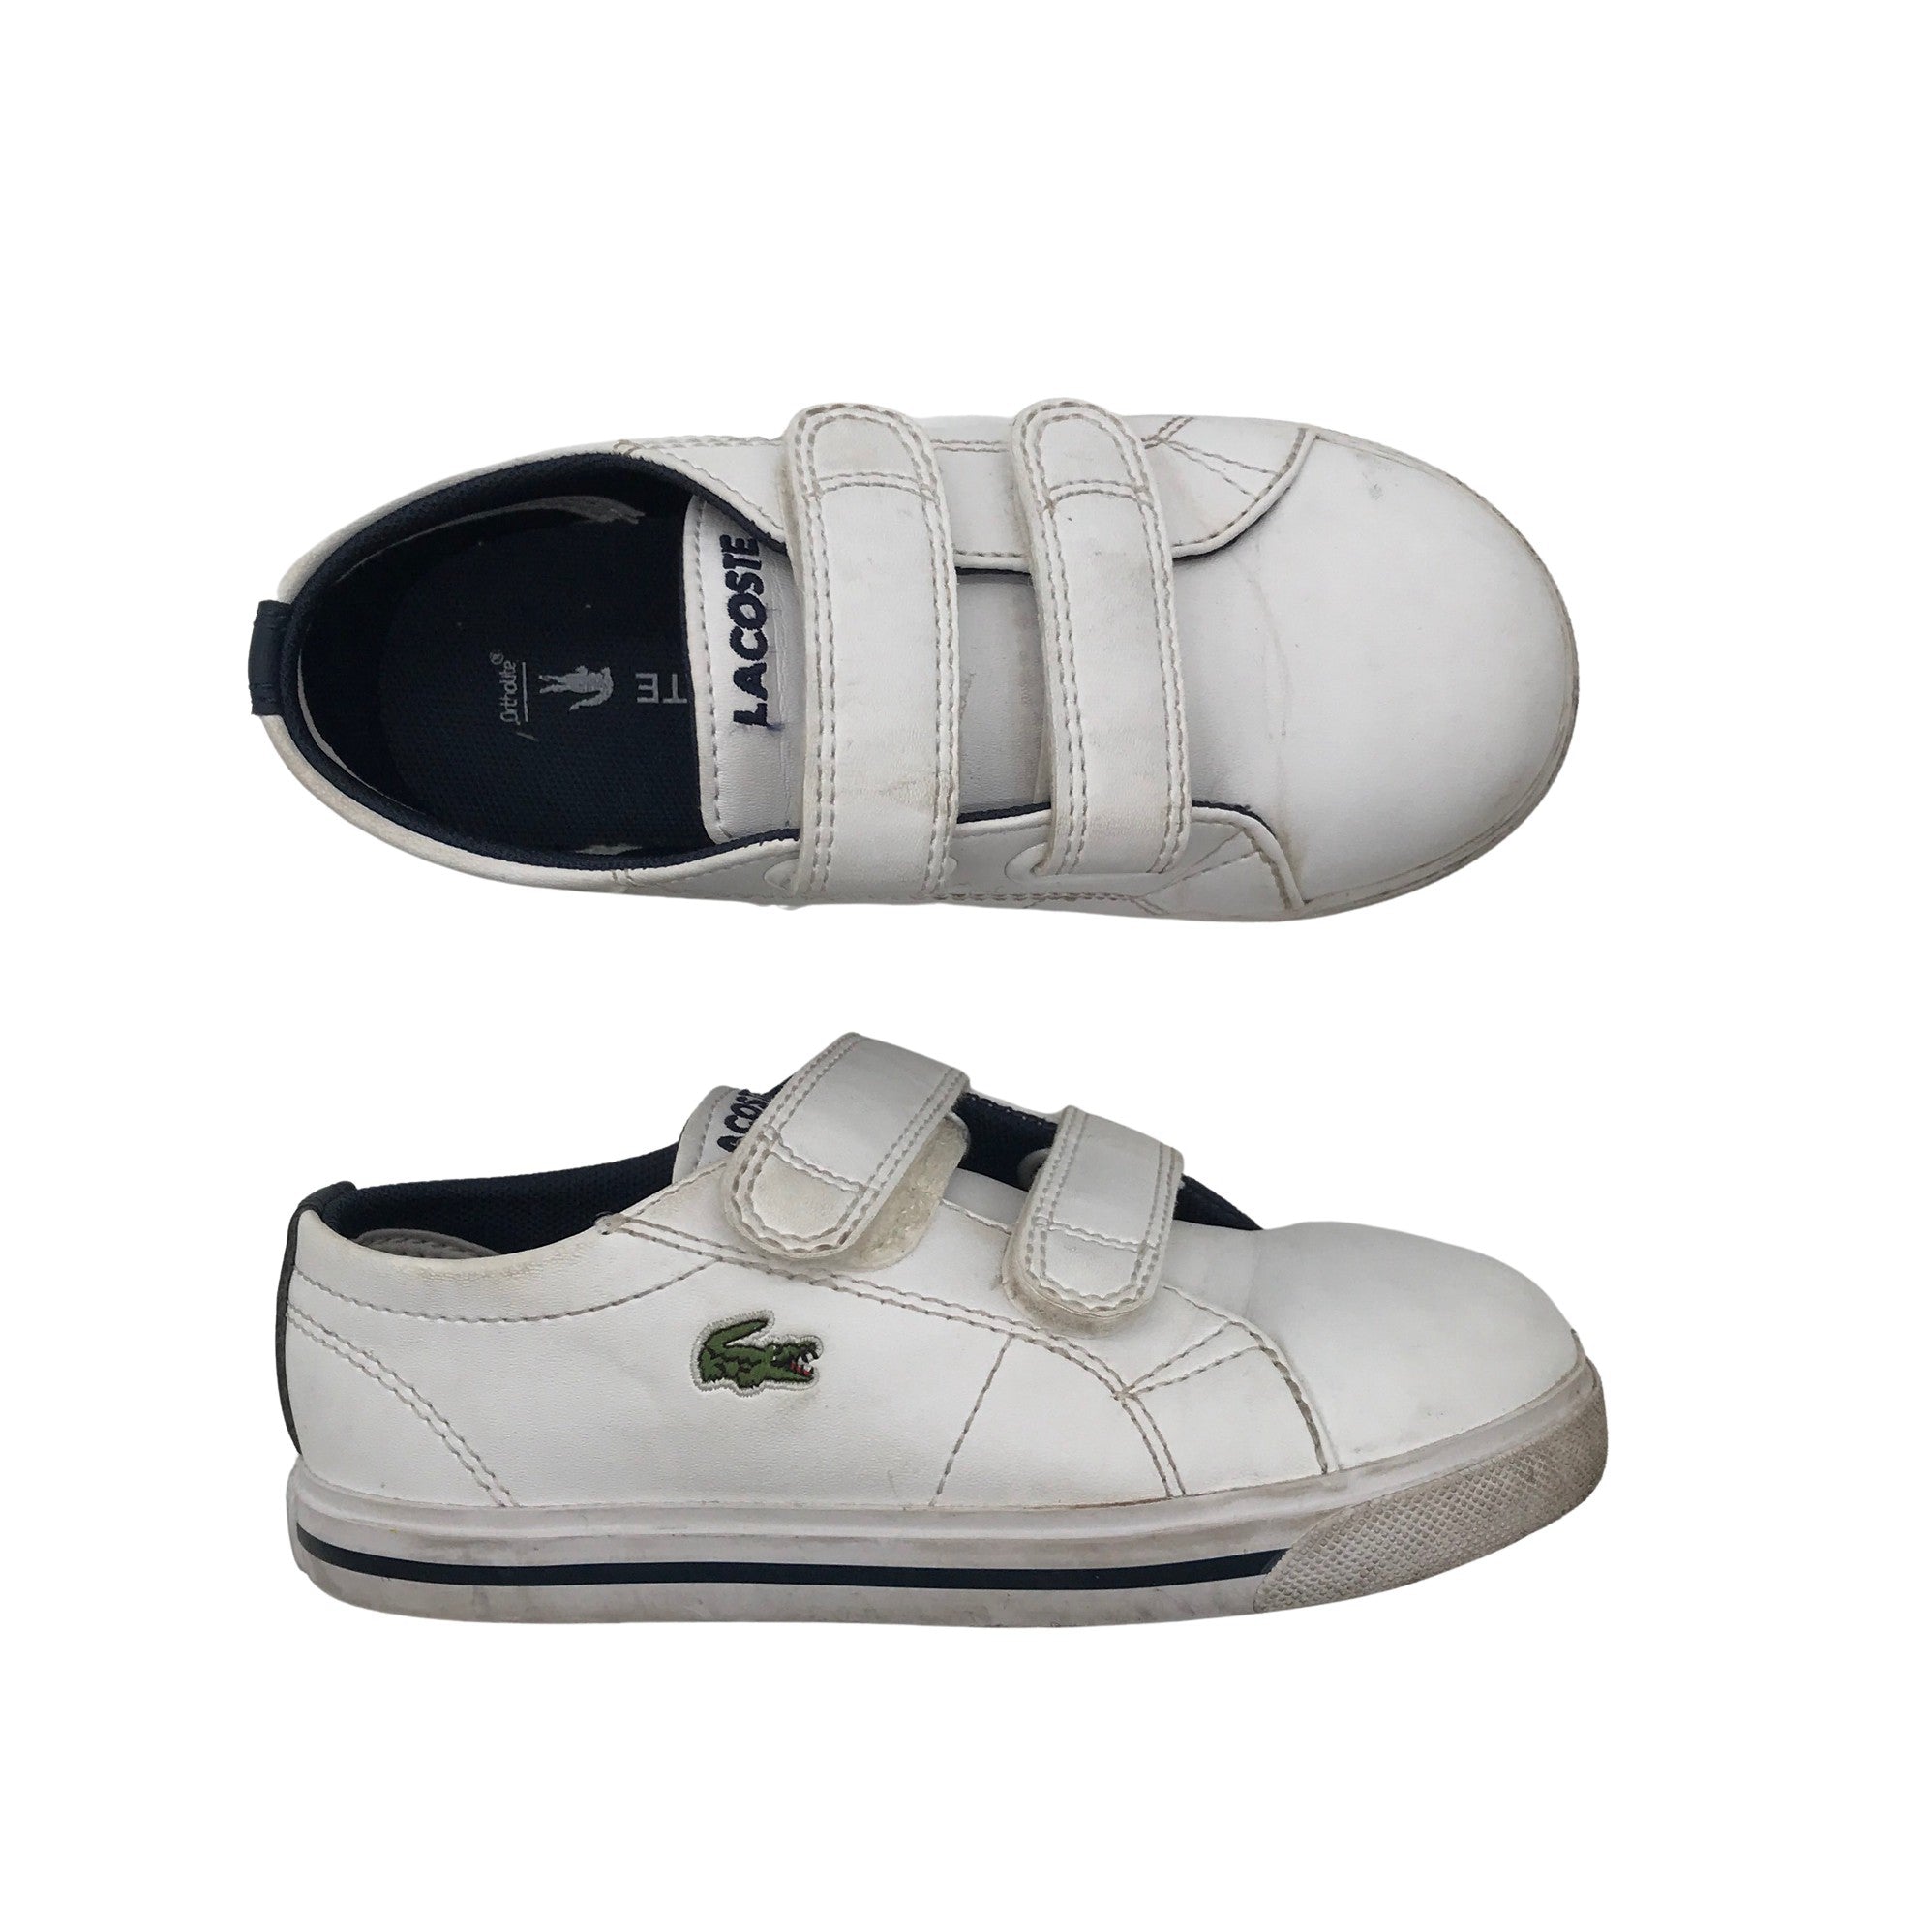 Lacoste Casual Lace Up Ortholite Tennis Shoes